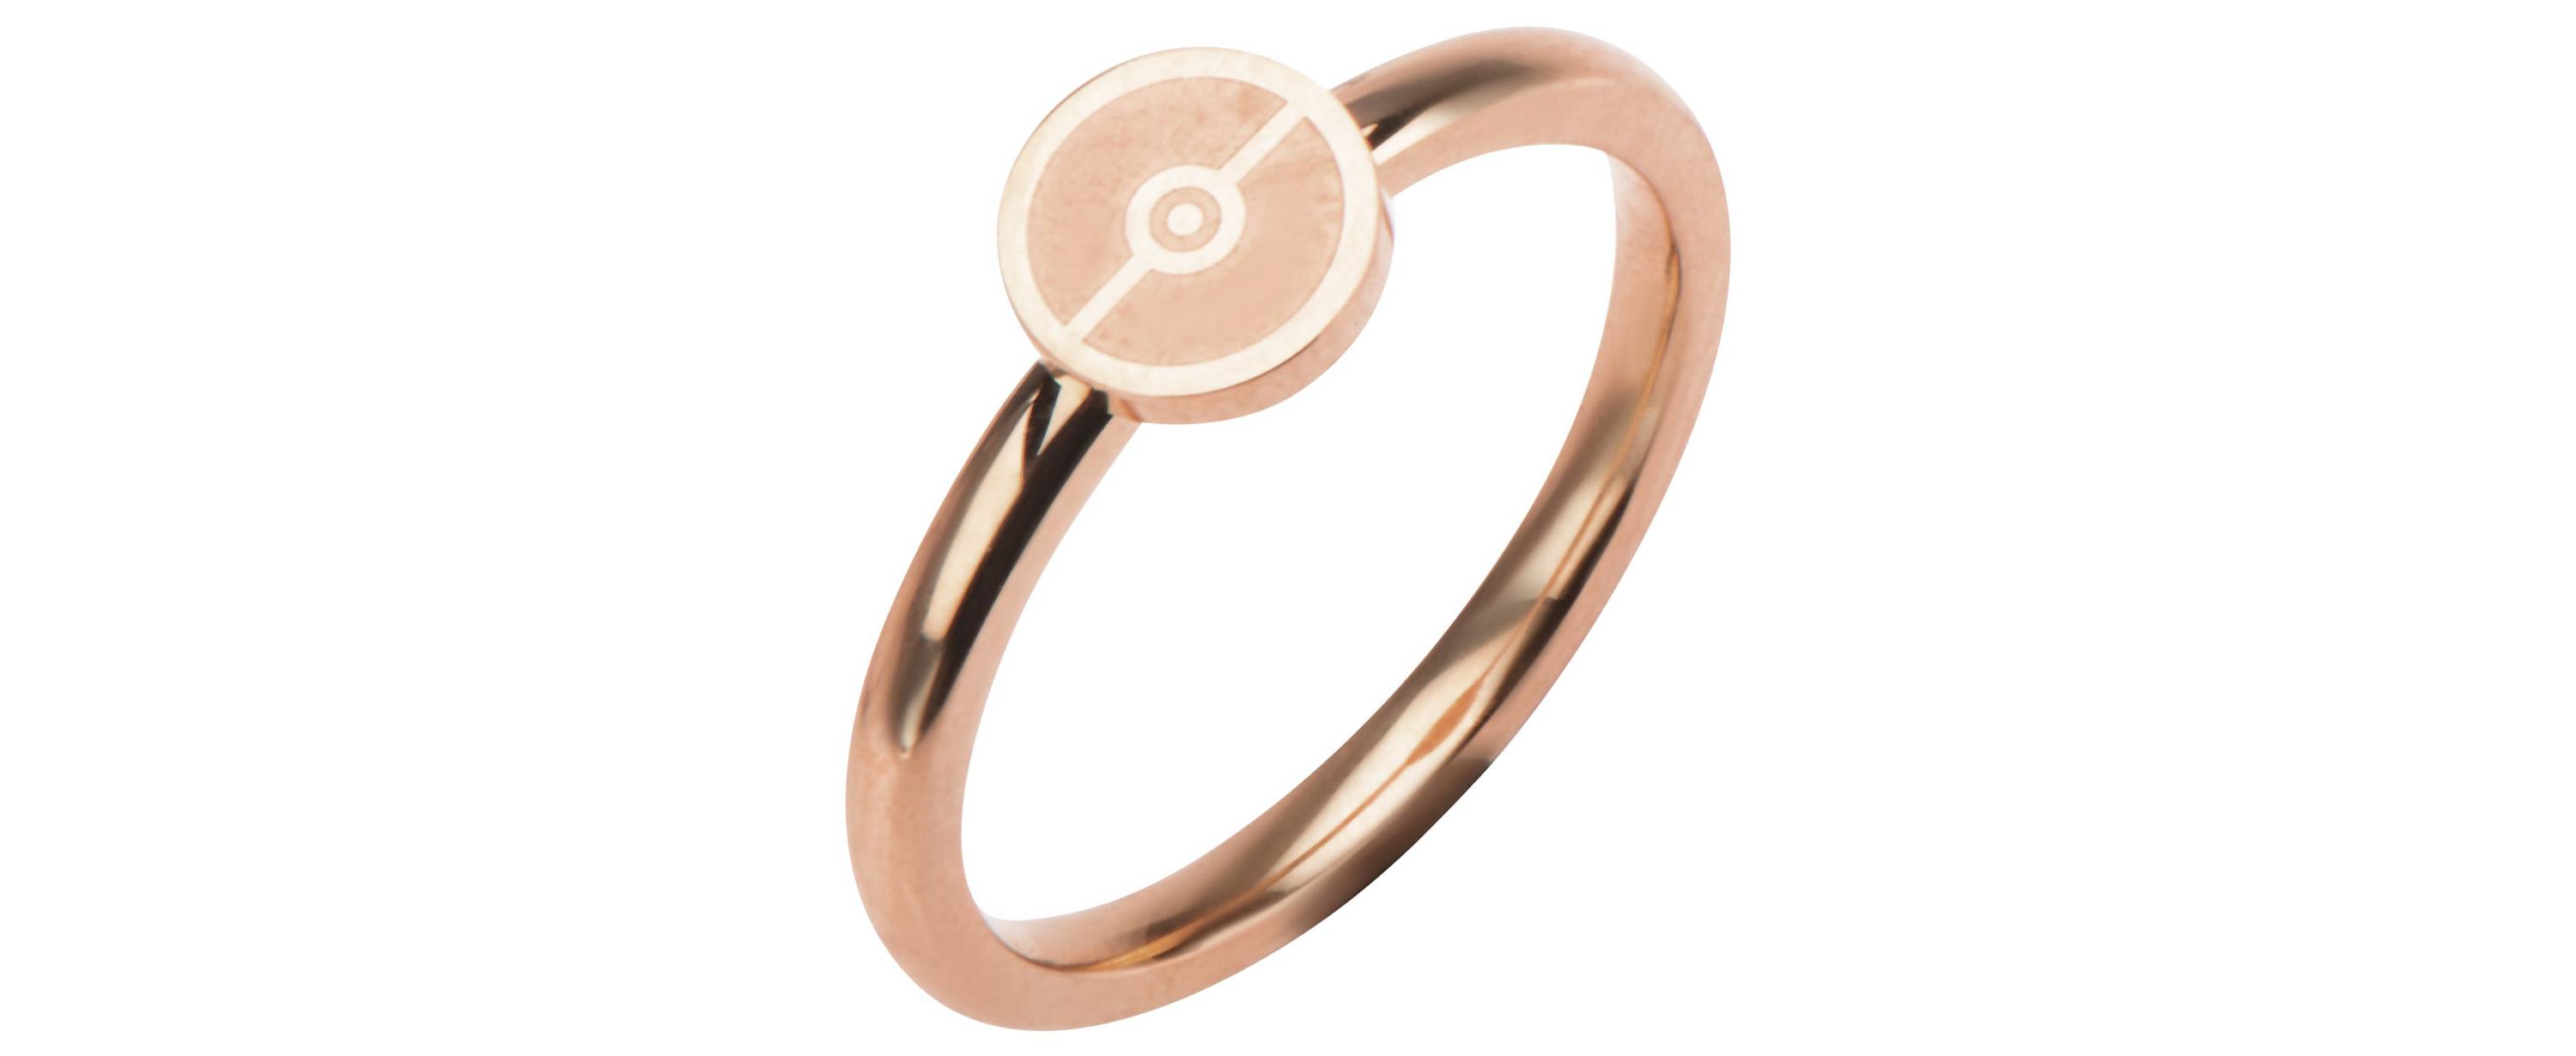 Pokeball Rose Gold-Plated Stainless Steel Ring - Size 8